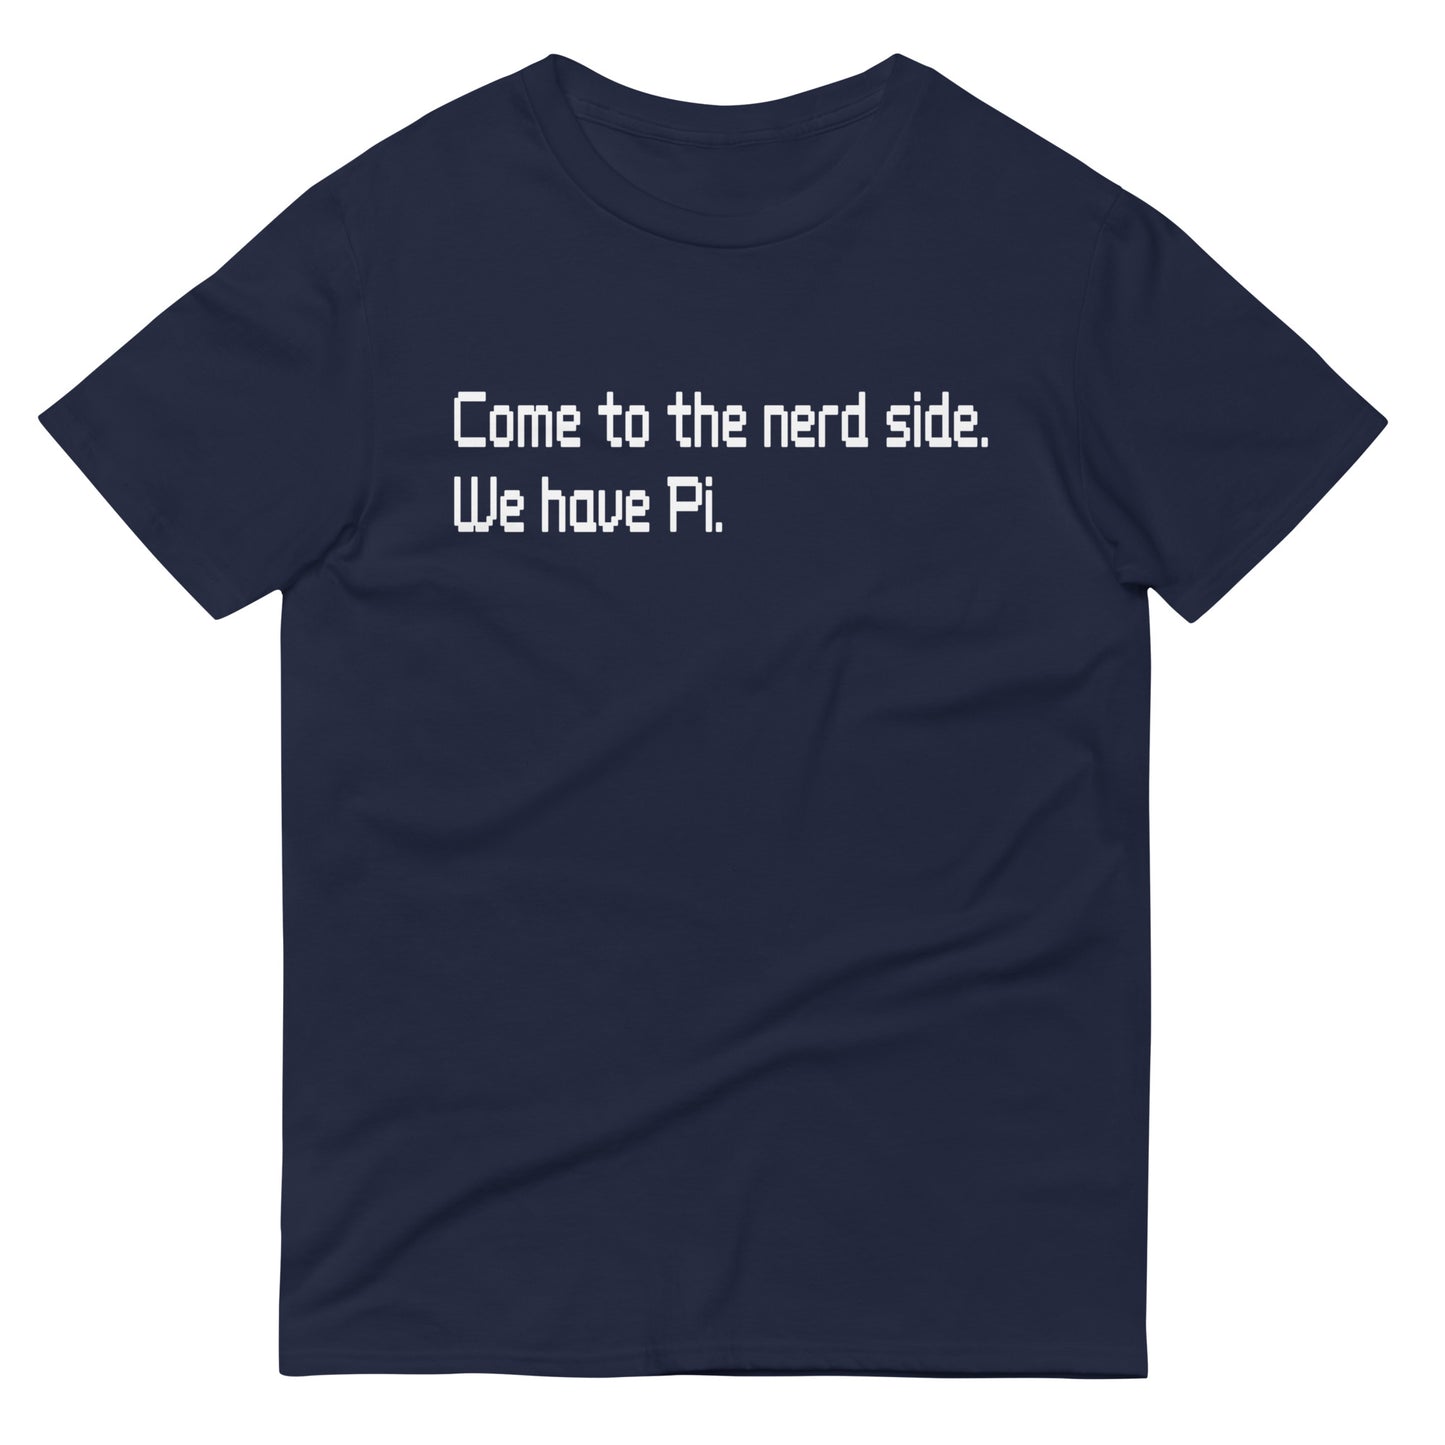 Come To The Nerd Side. We Have Pi. Men's Signature Tee